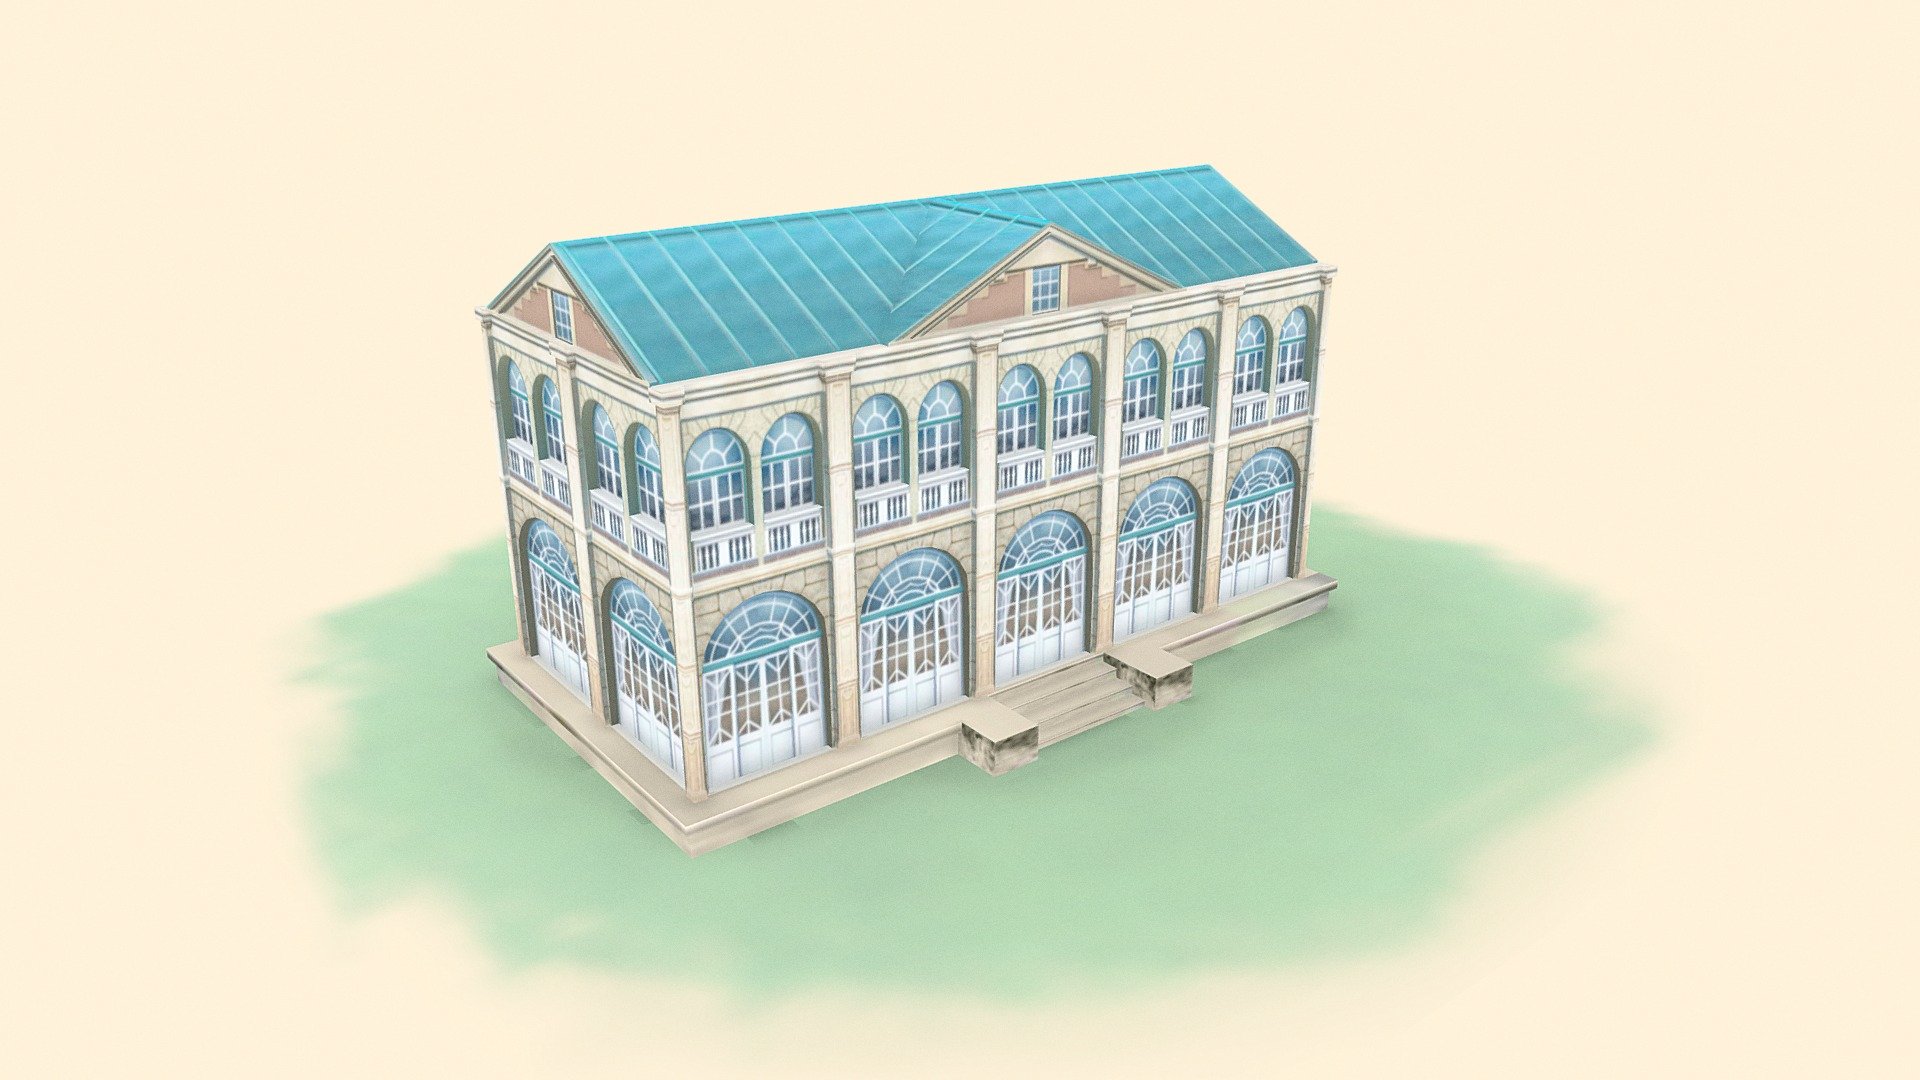 Generate an image of a grand mansion that adopts an M.C. Escher style. The  mansion should feature impossible geometries